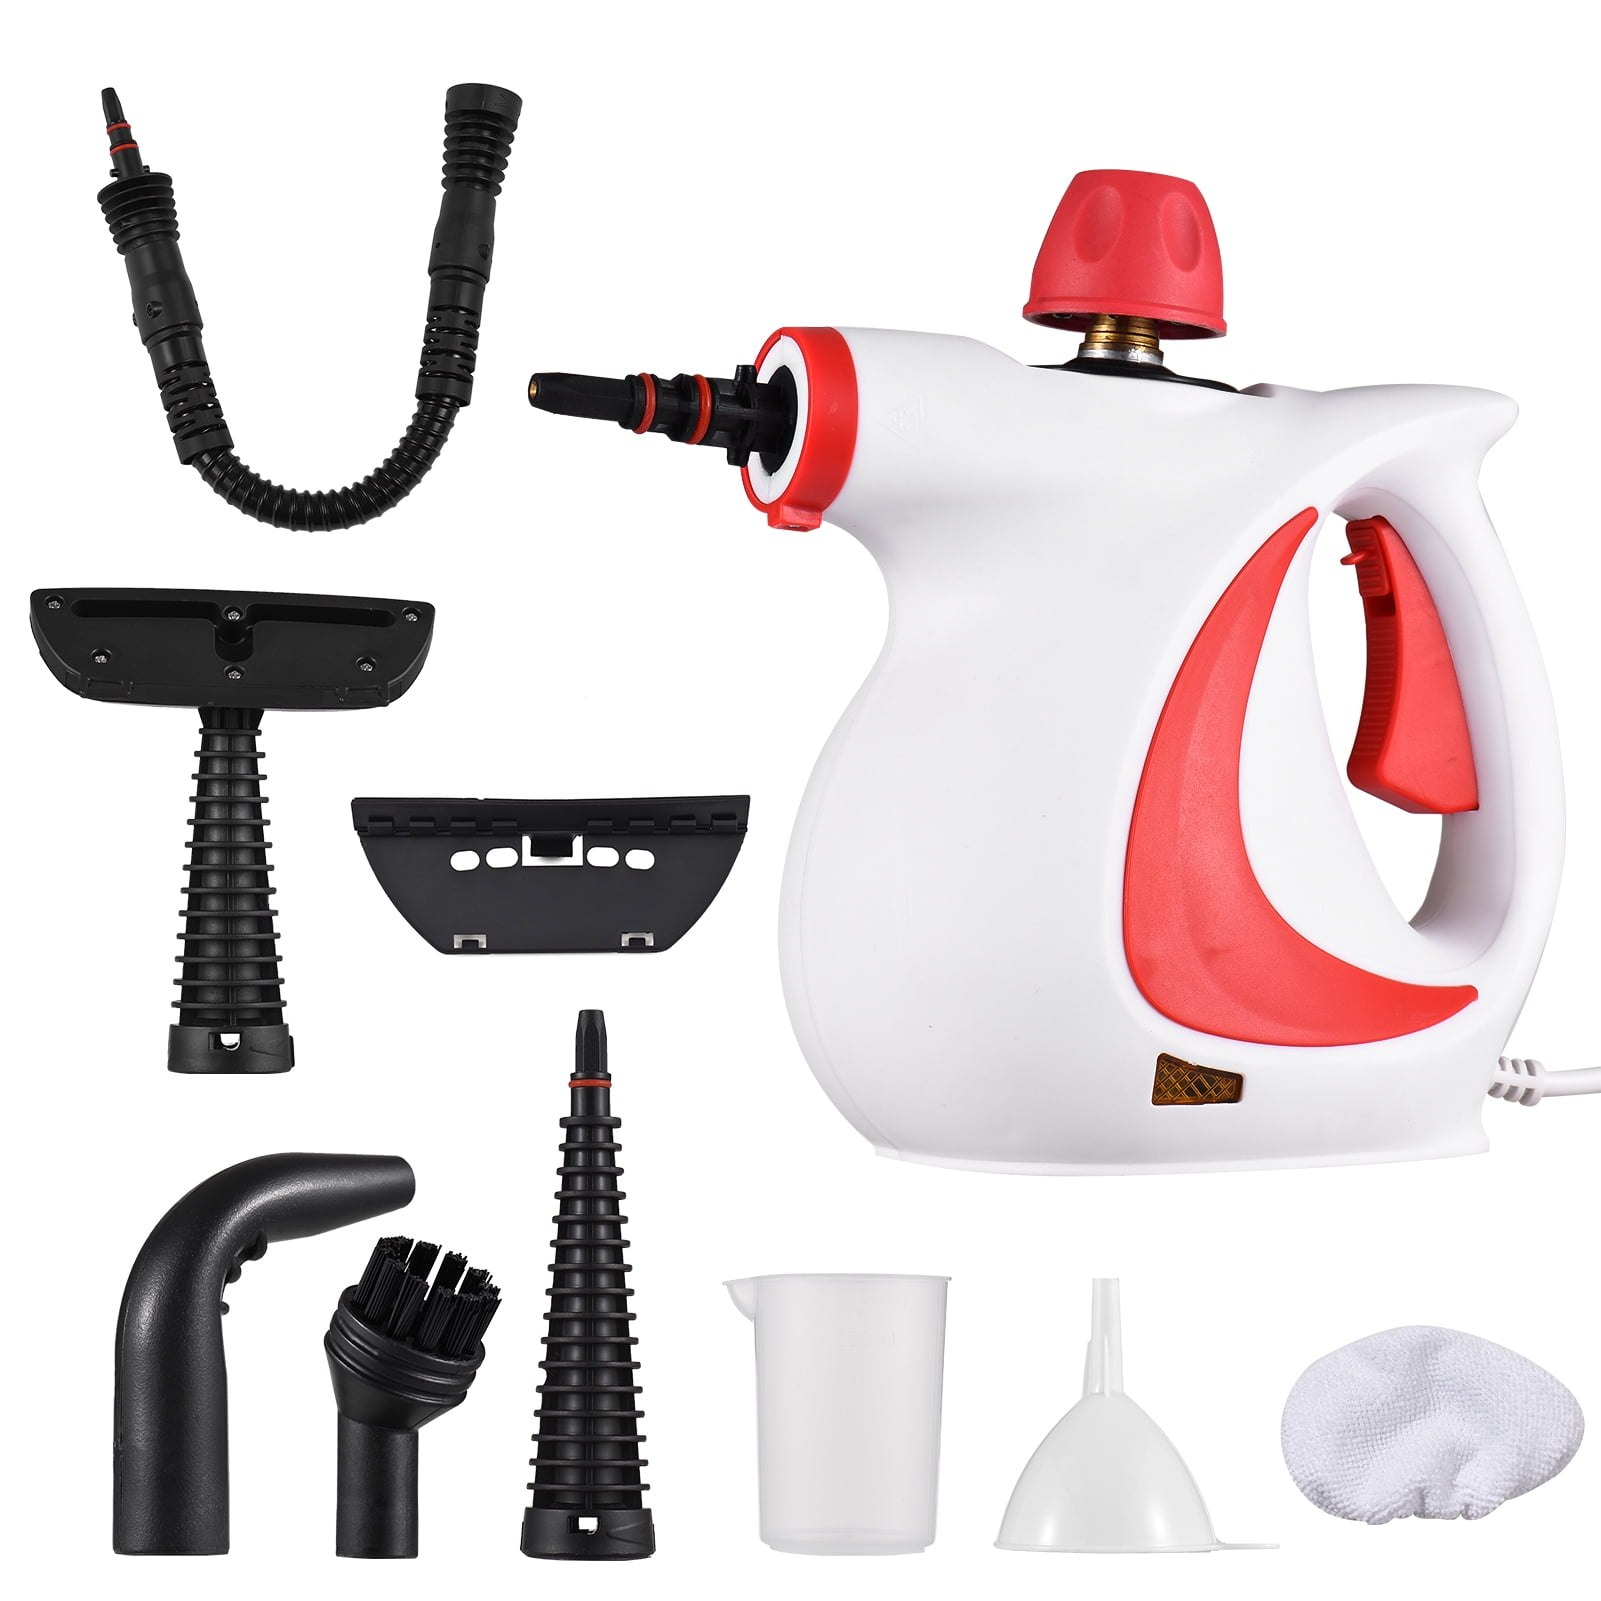 2500W Handheld Steamer for Cleaning Portable Steam Cleaner for Tile Grout  Windows Bathroom,Kitchen,Car Detailing